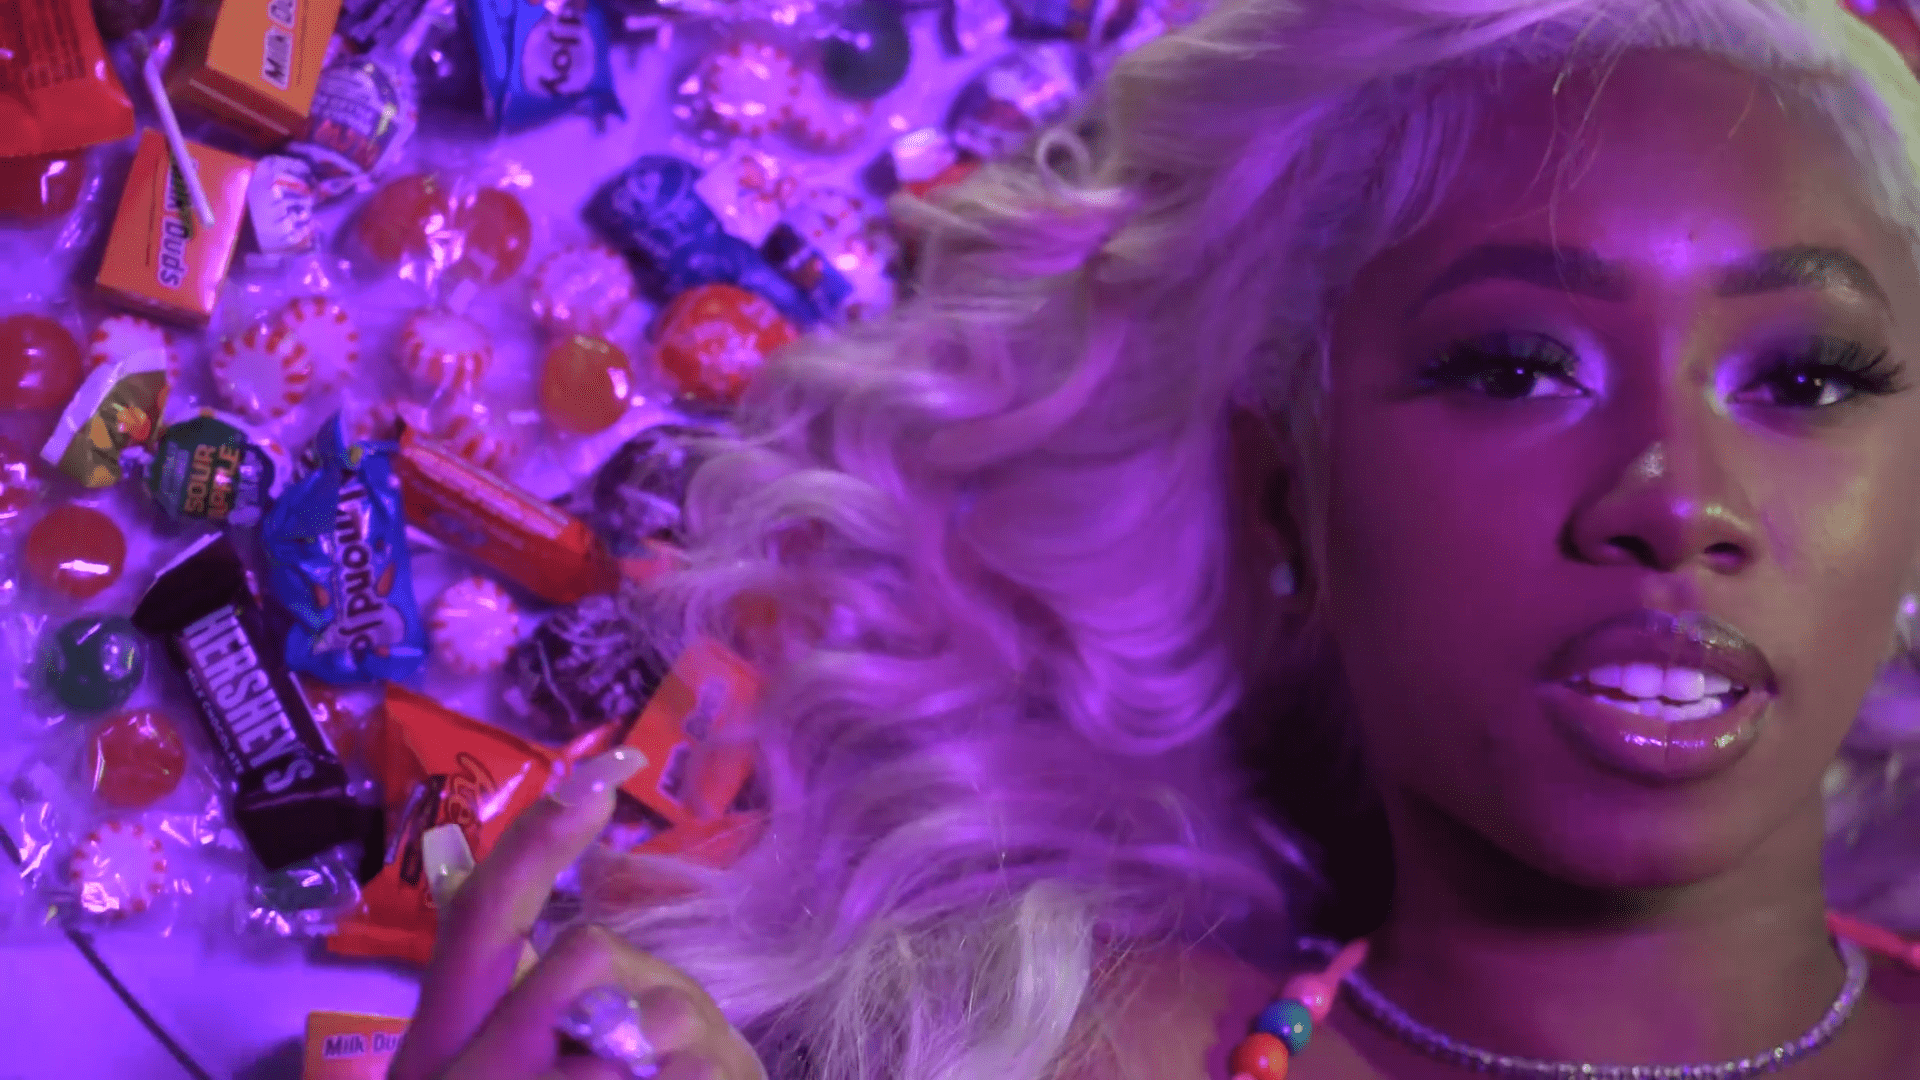 Queen Nu and Omeretta Take You to the Candy Store in Their New Single